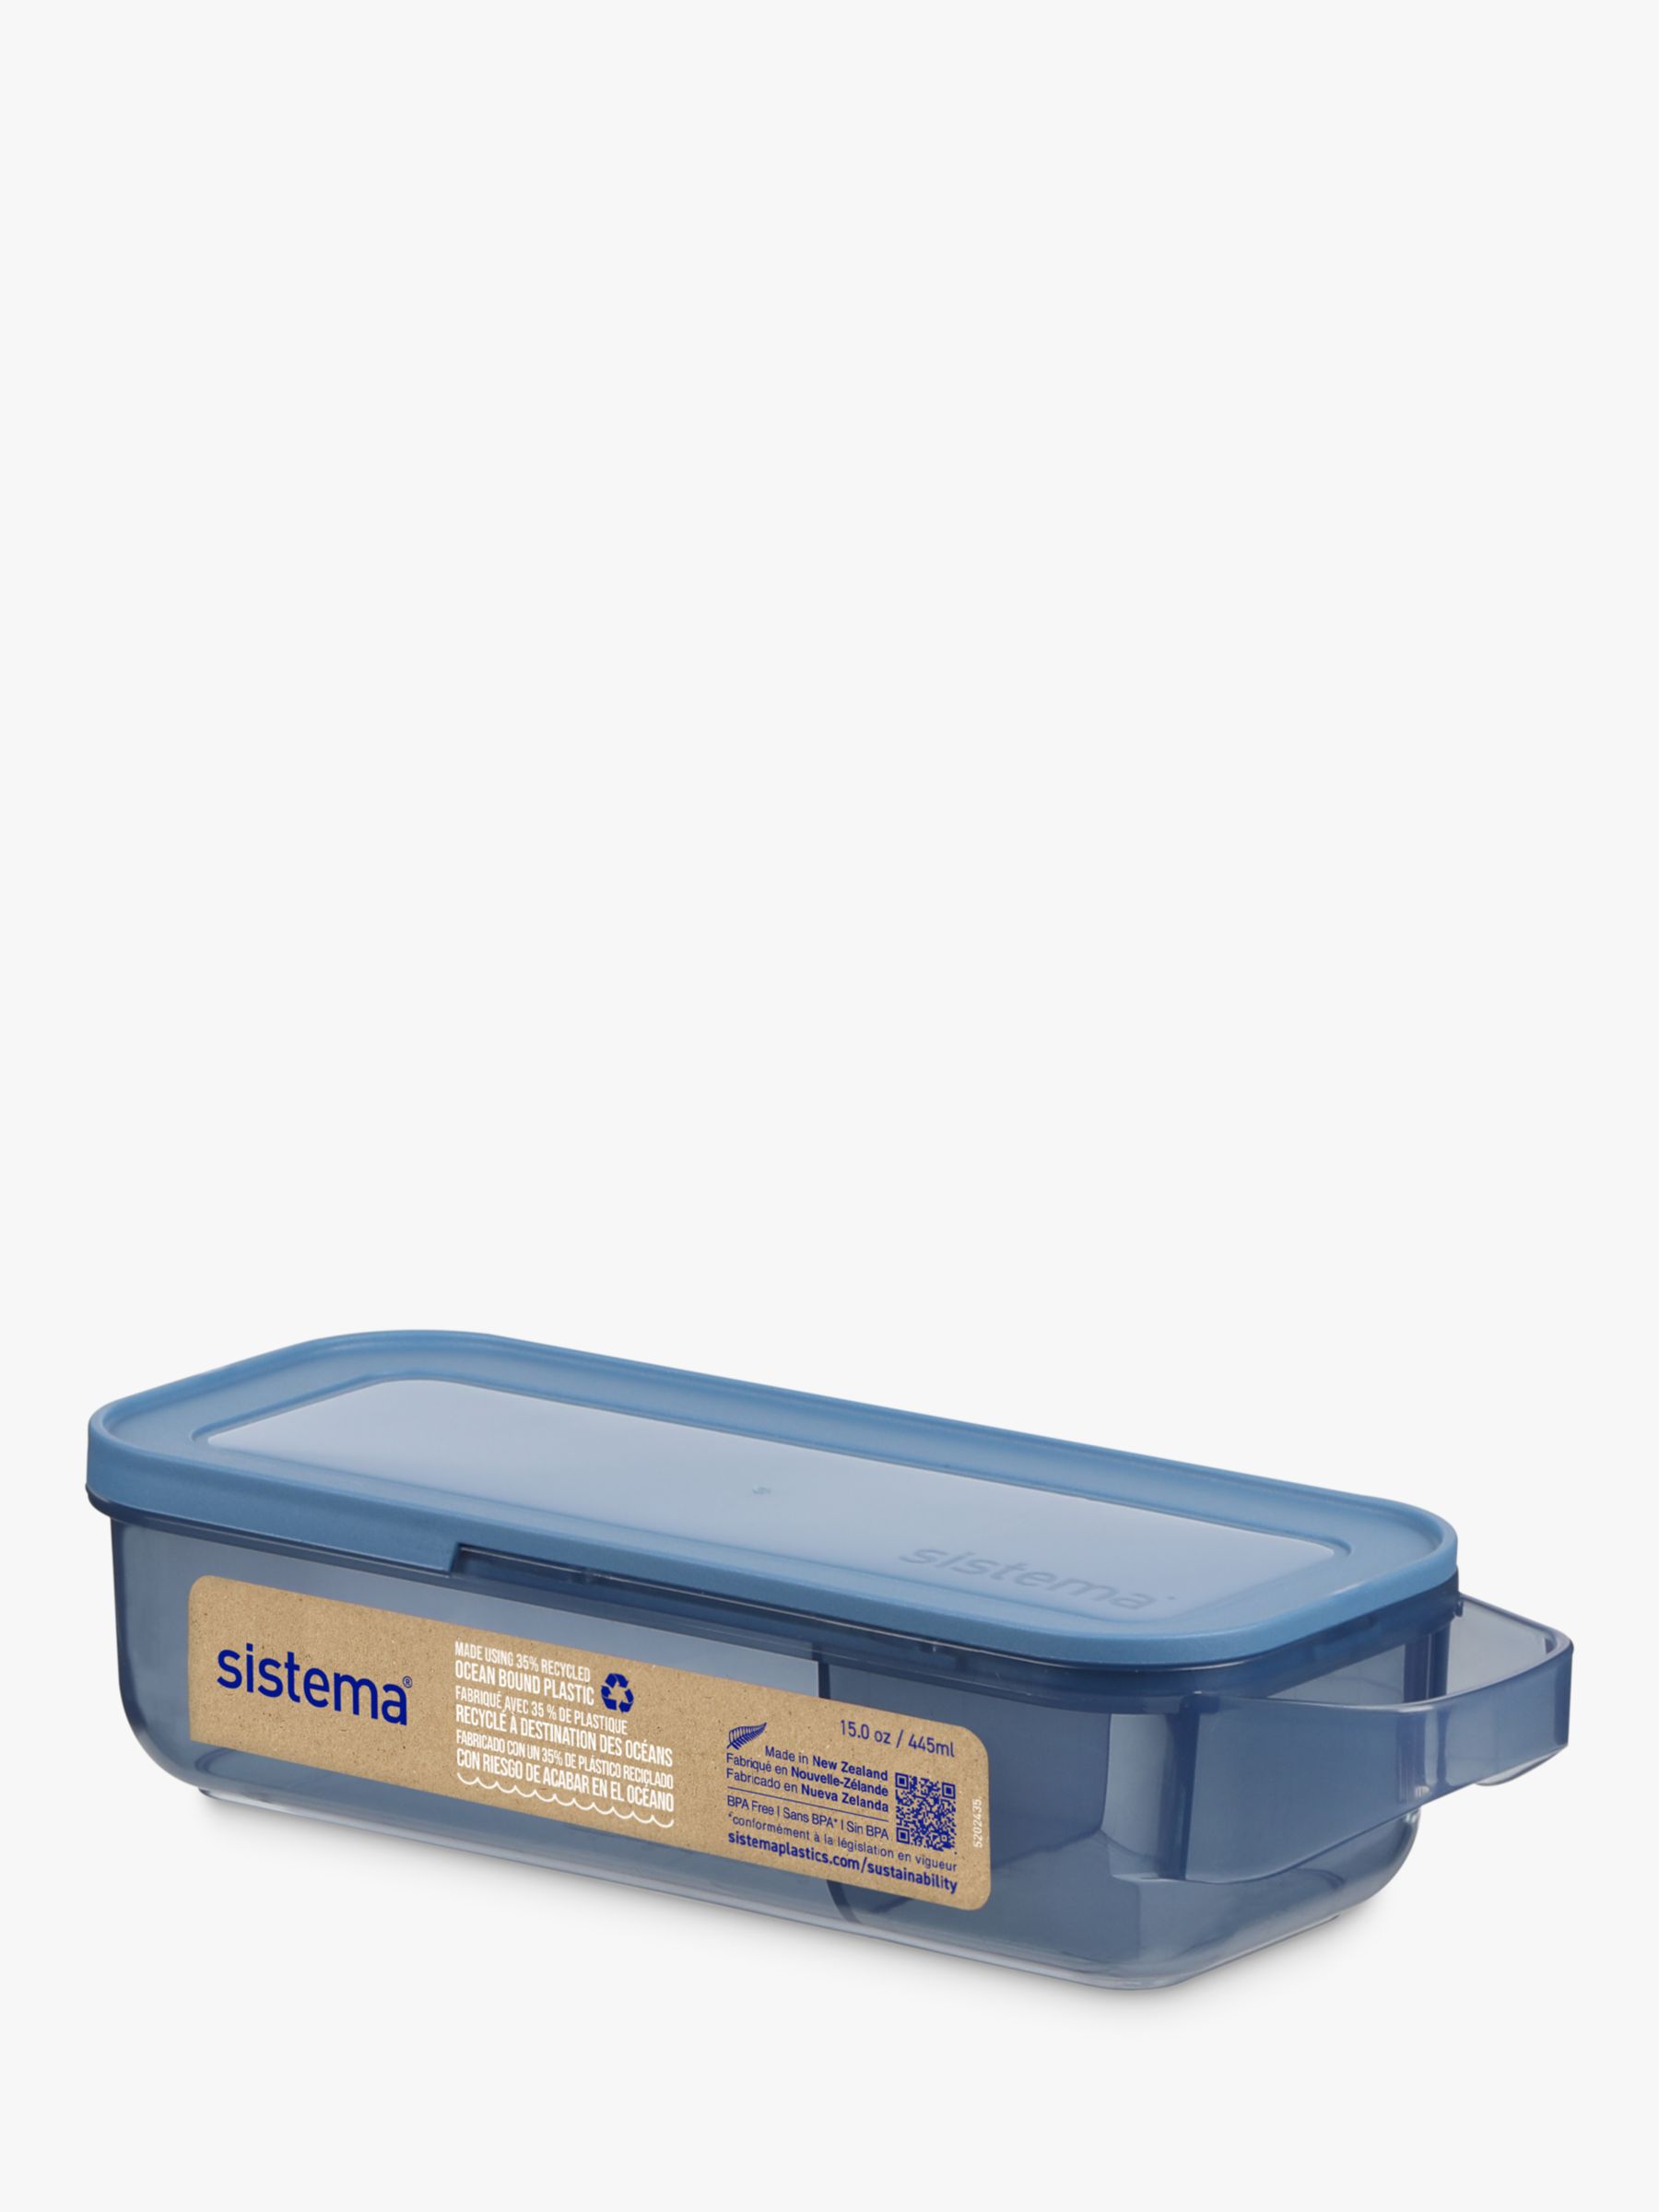 Sistema Nest It Food Containers, 3 pk - Ralphs